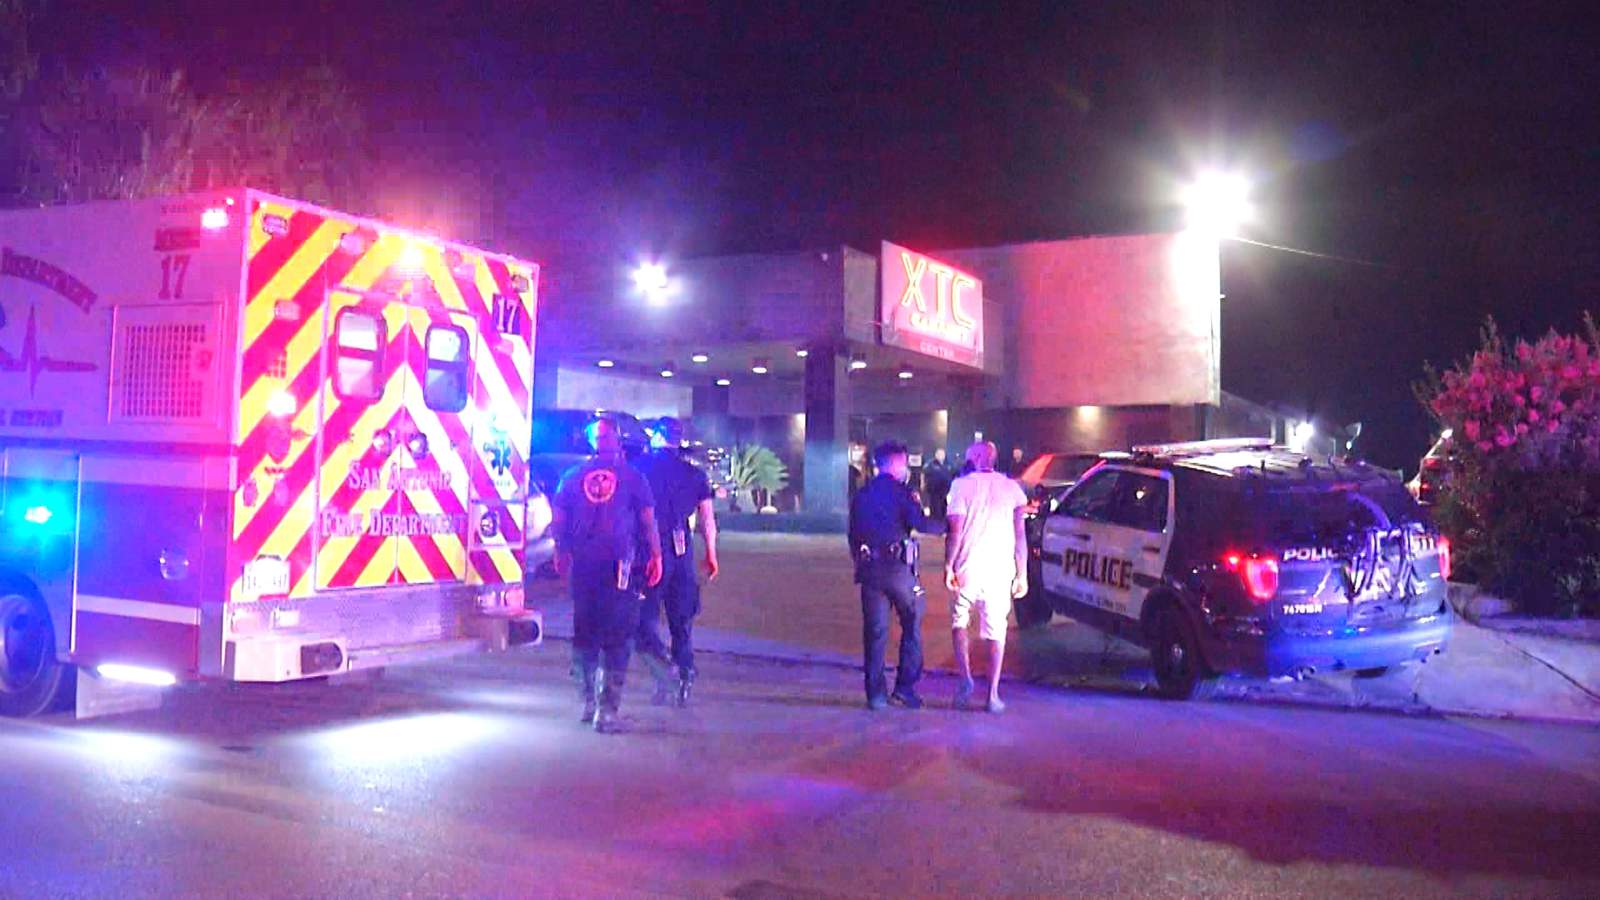 Security guard shoots man who fired AK-47 at XTC Cabaret, police say